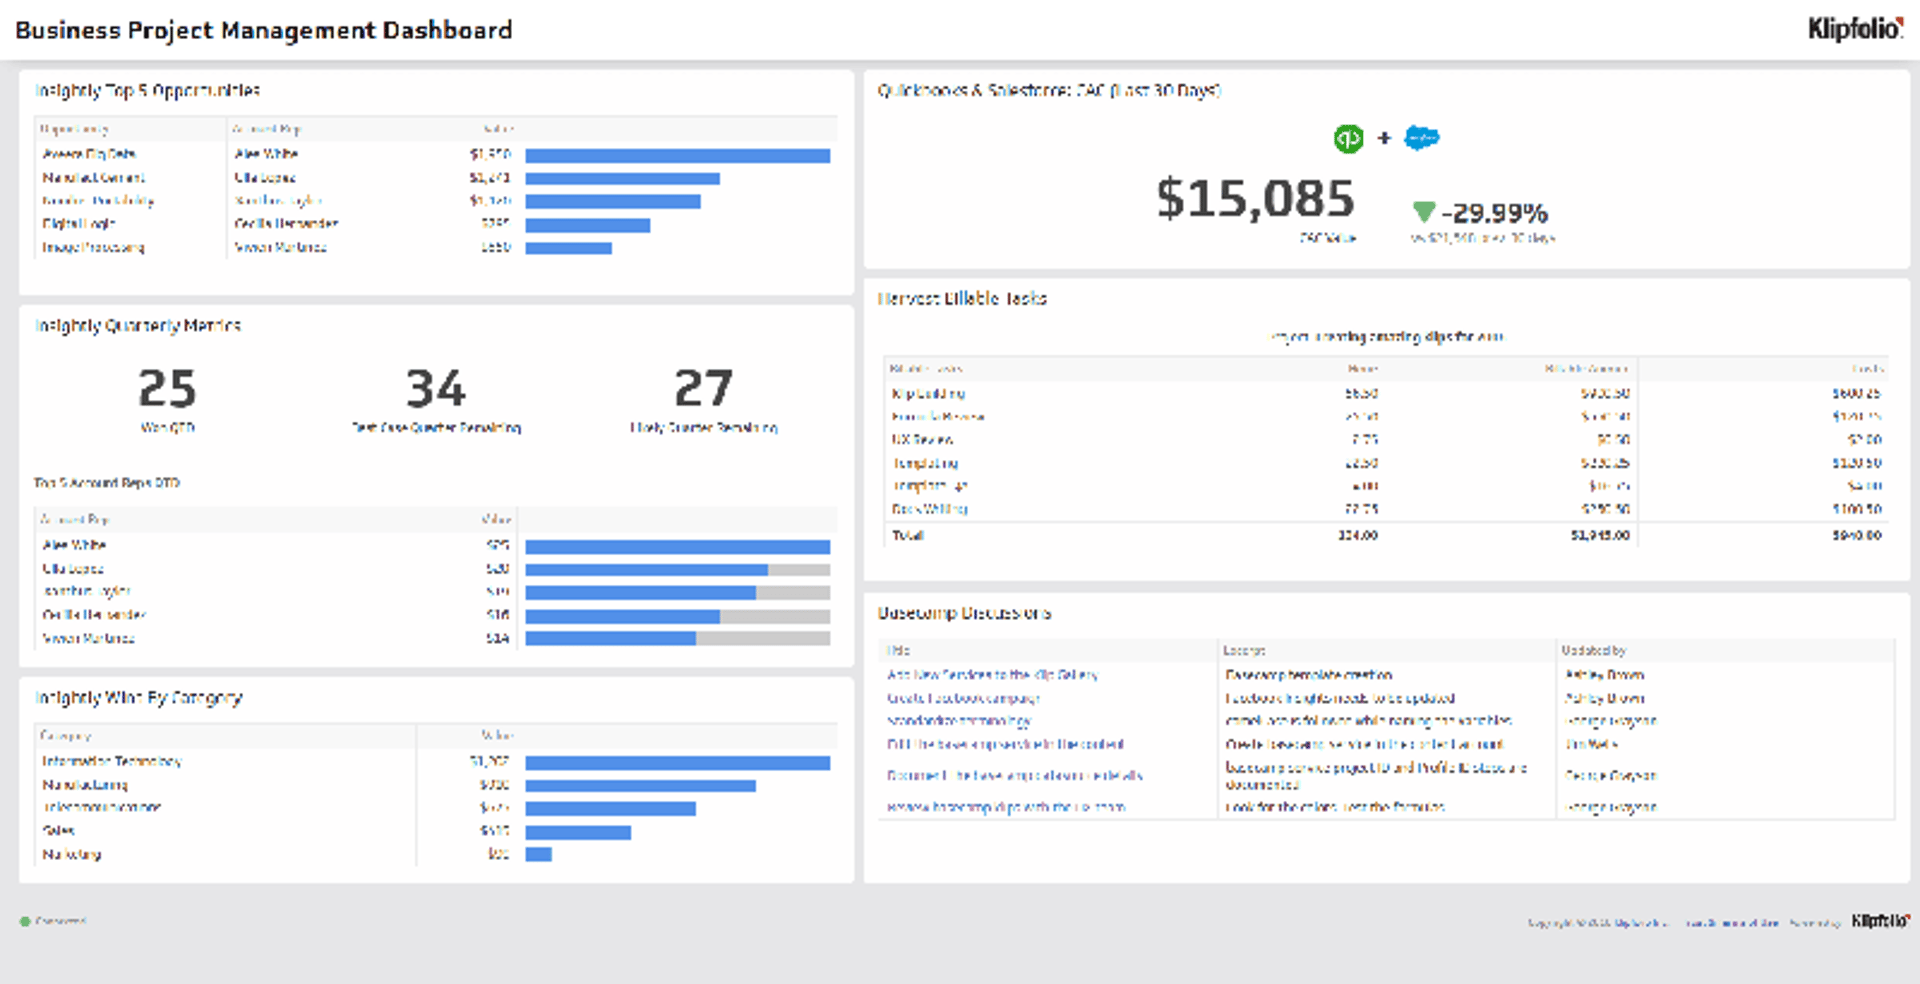 Business Project Management Dashboard